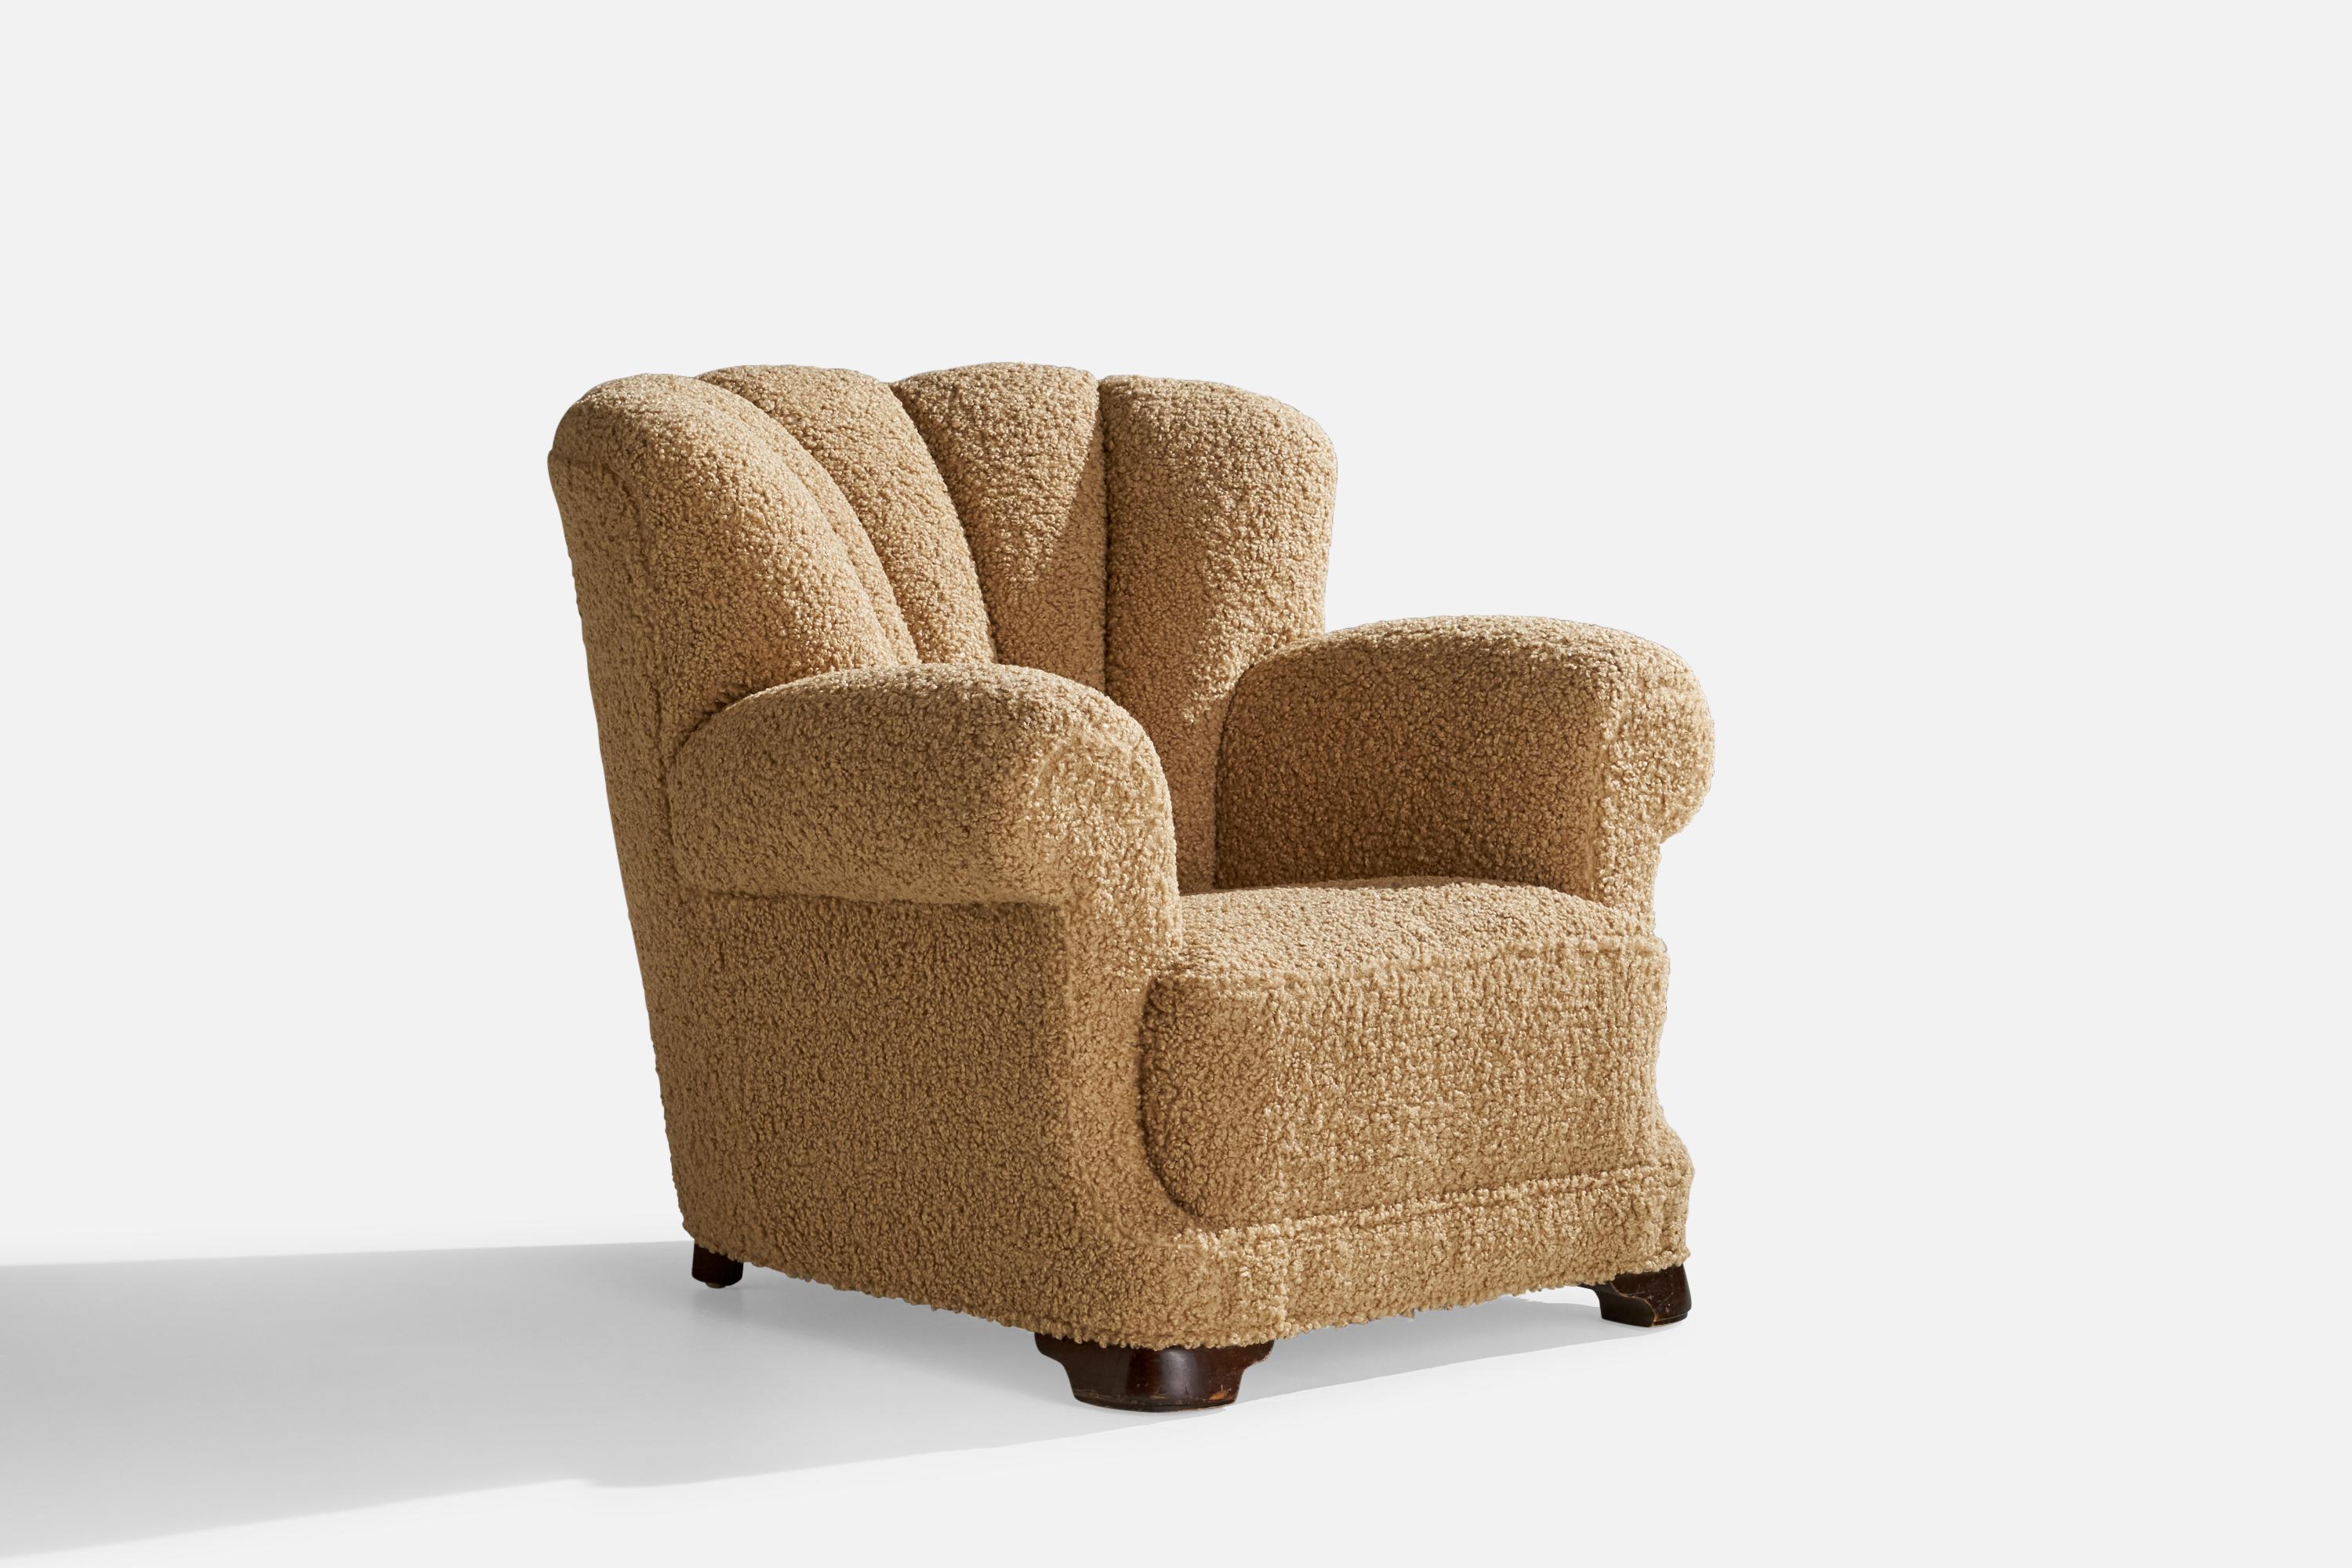 A dark-stained wood and beige bouclé fabric lounge chair designed and produced in Denmark, 1930s.

Seat height 16”